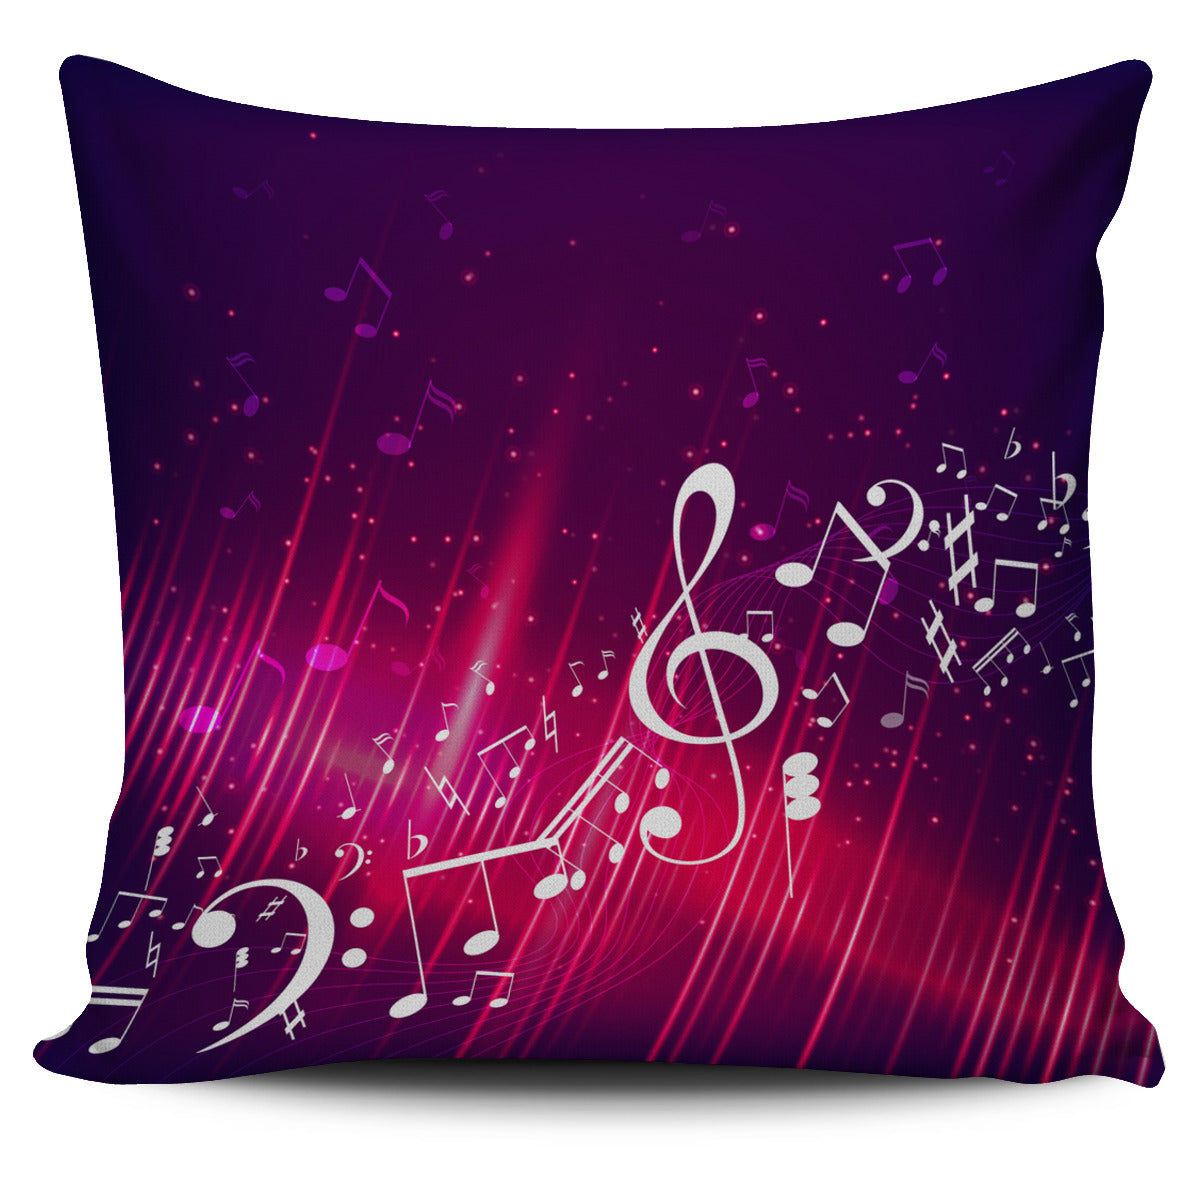 Magical Music Pillow Cover